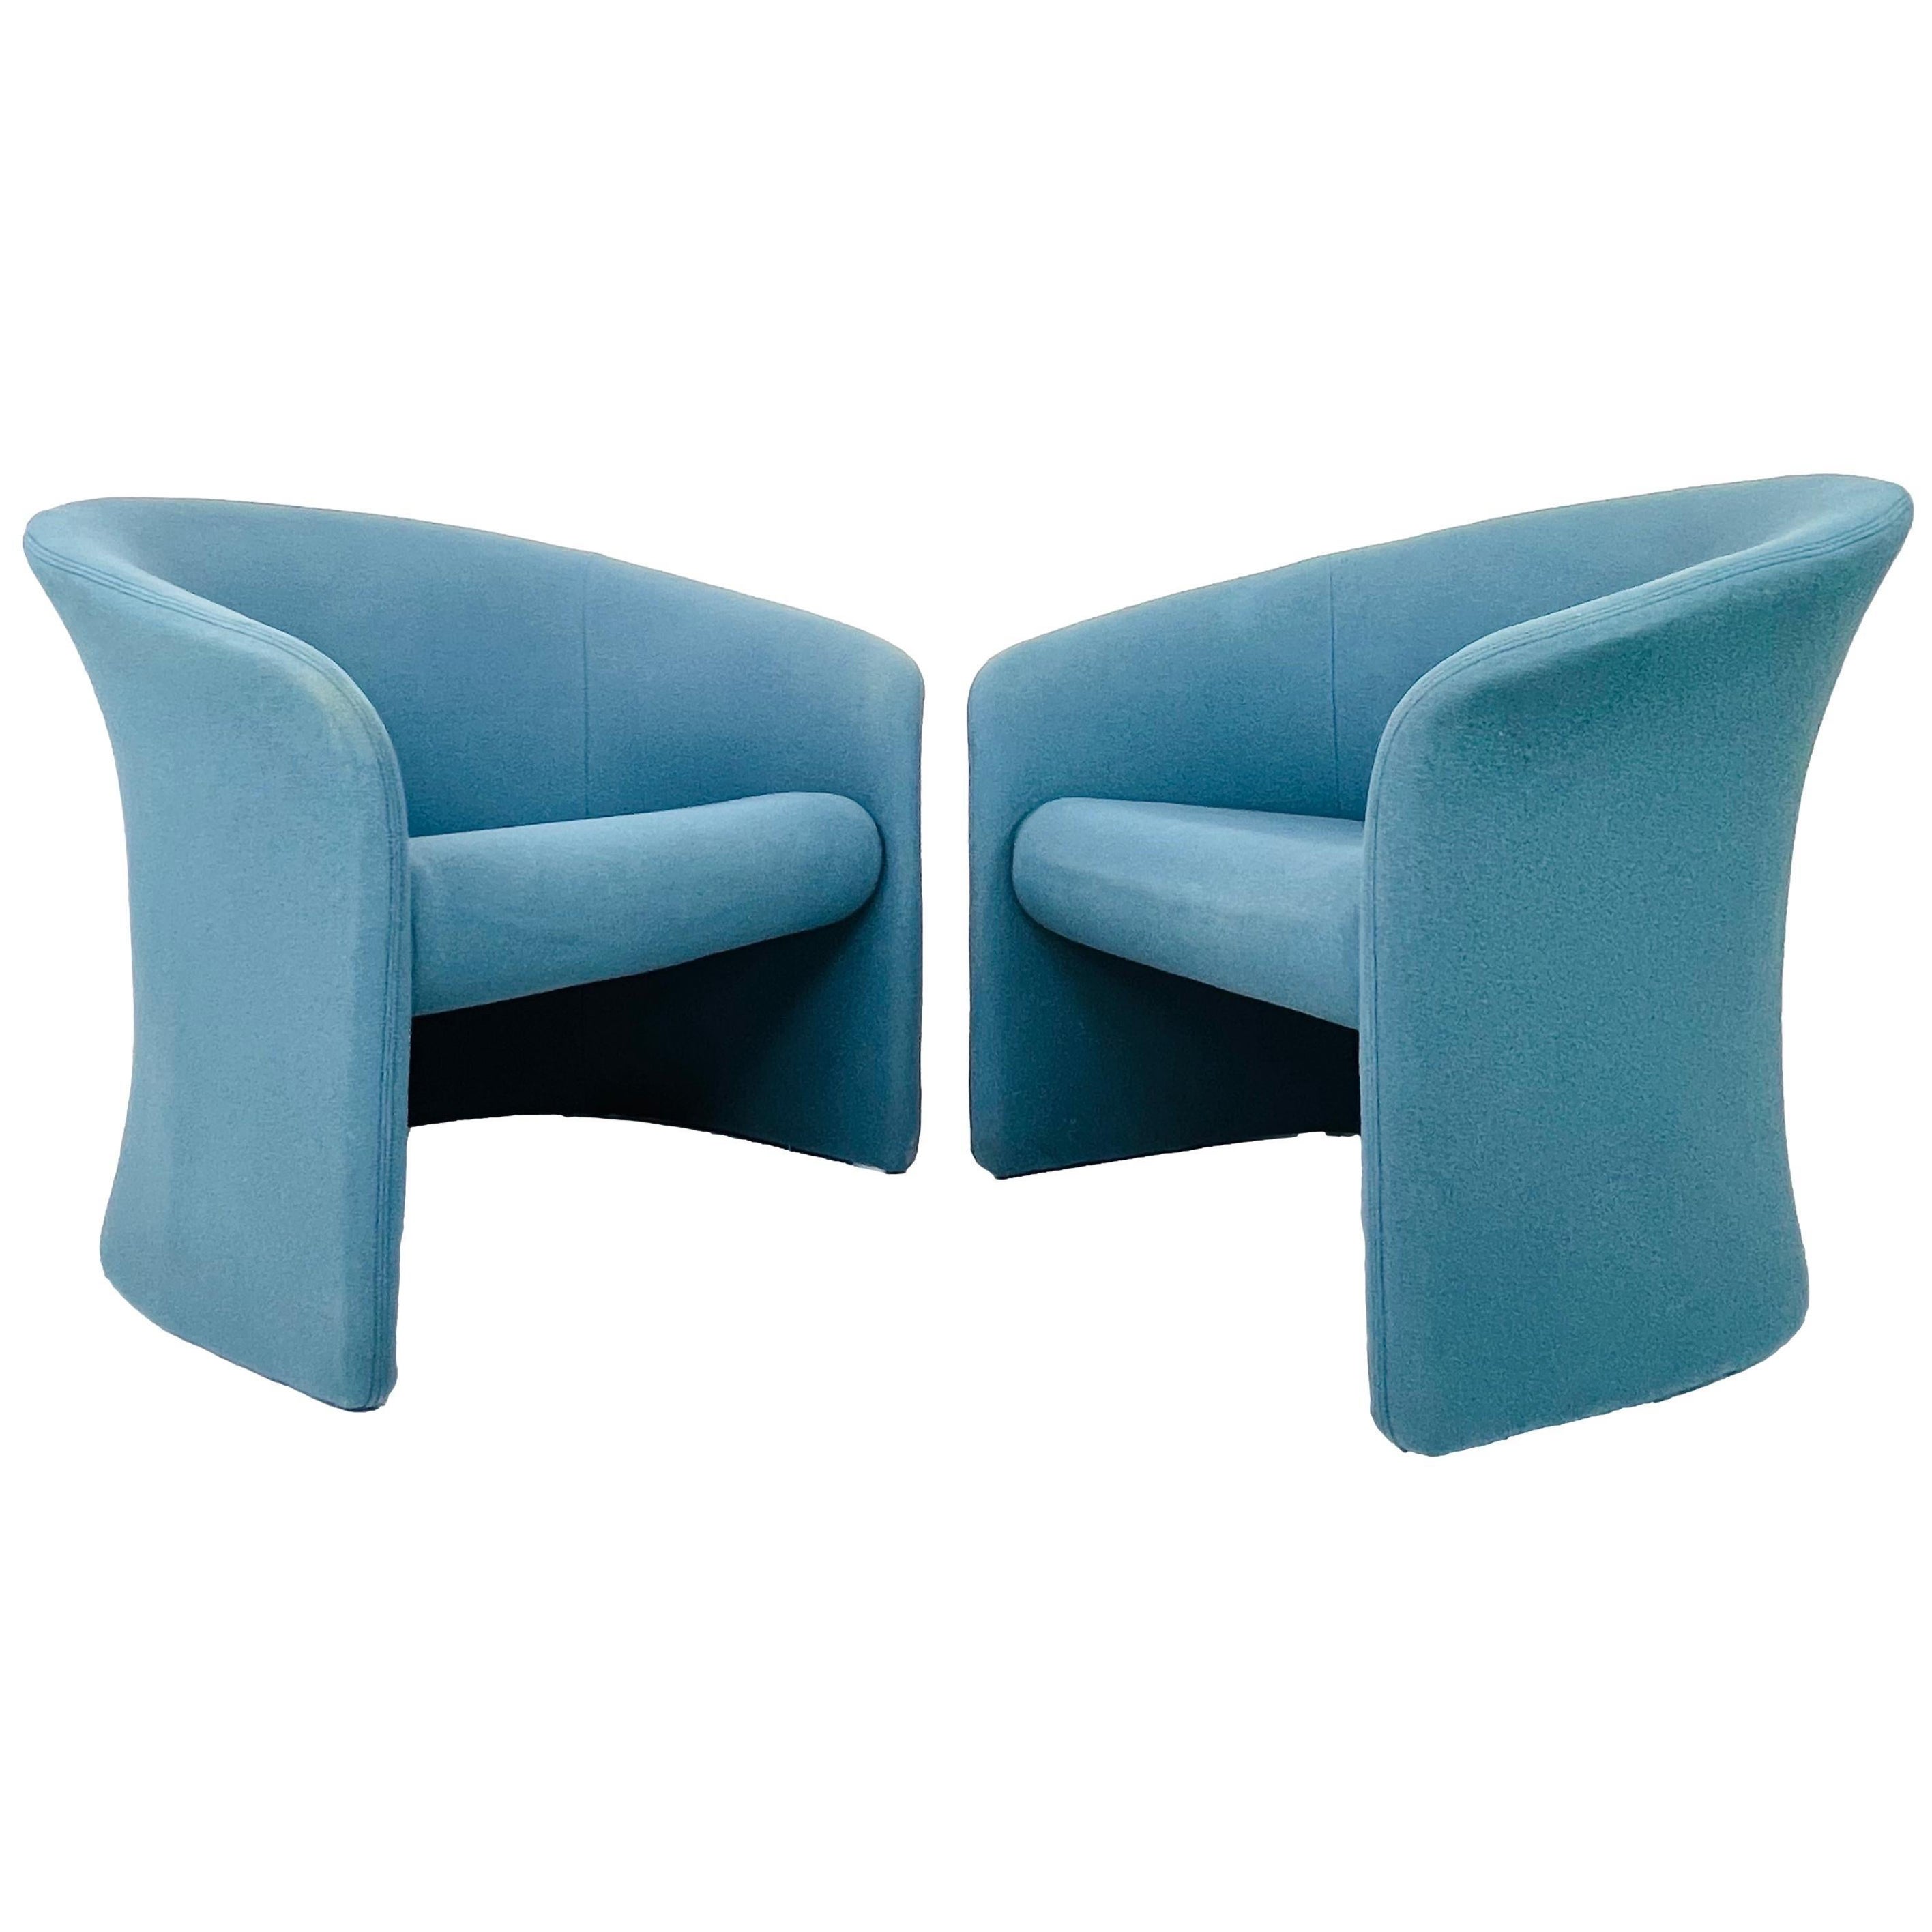 Pair of Postmodern Tub Chairs by Massimo Vignelli